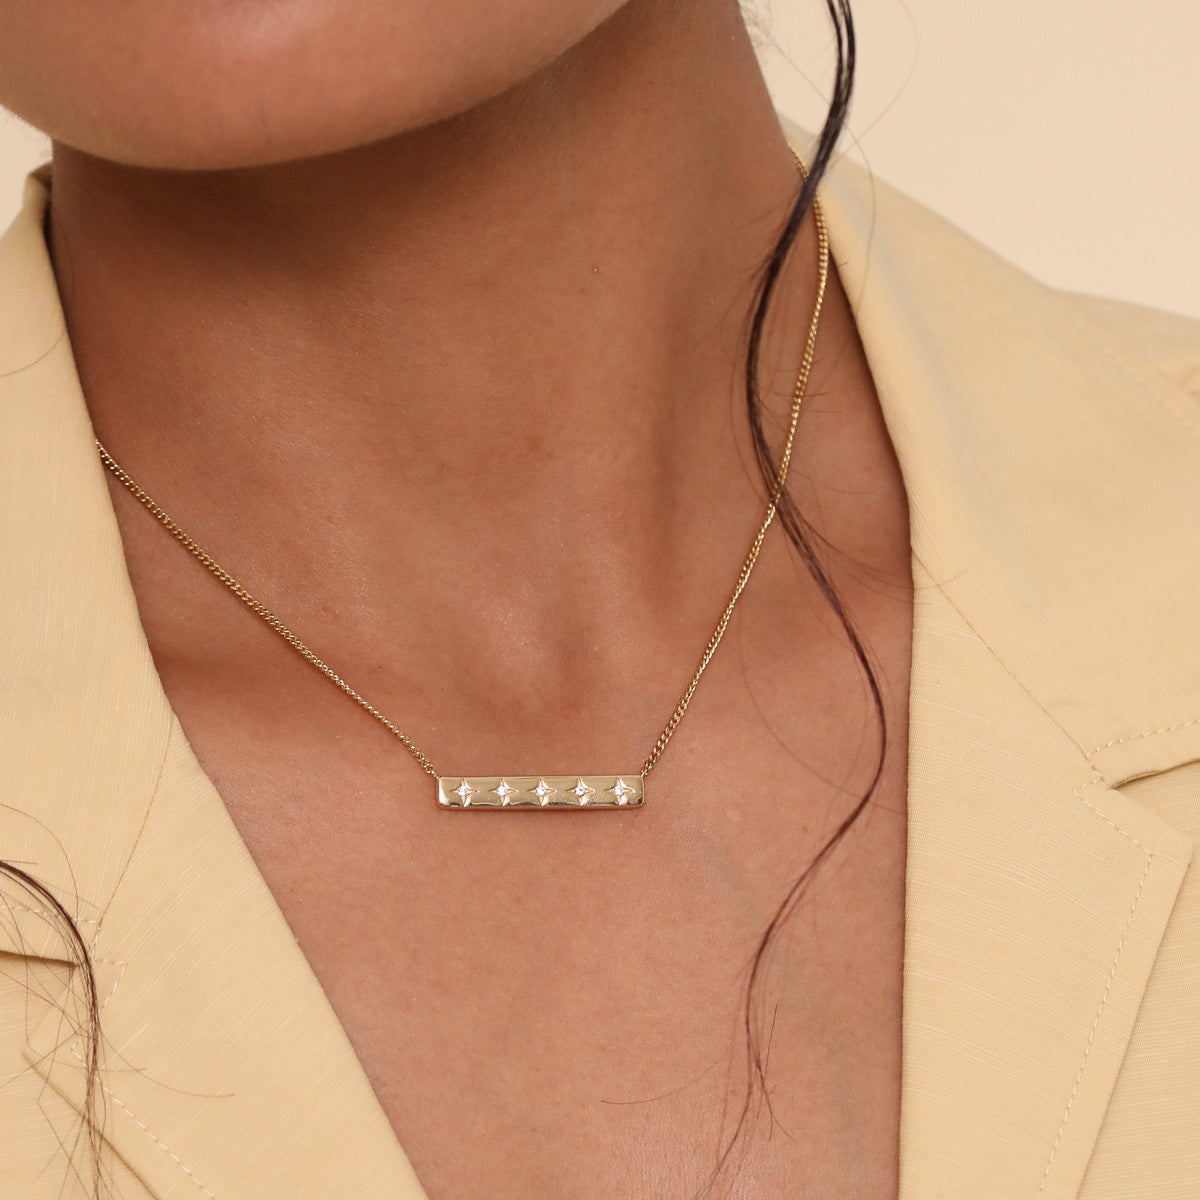 Cosmic Star Bar Necklace in Gold worn